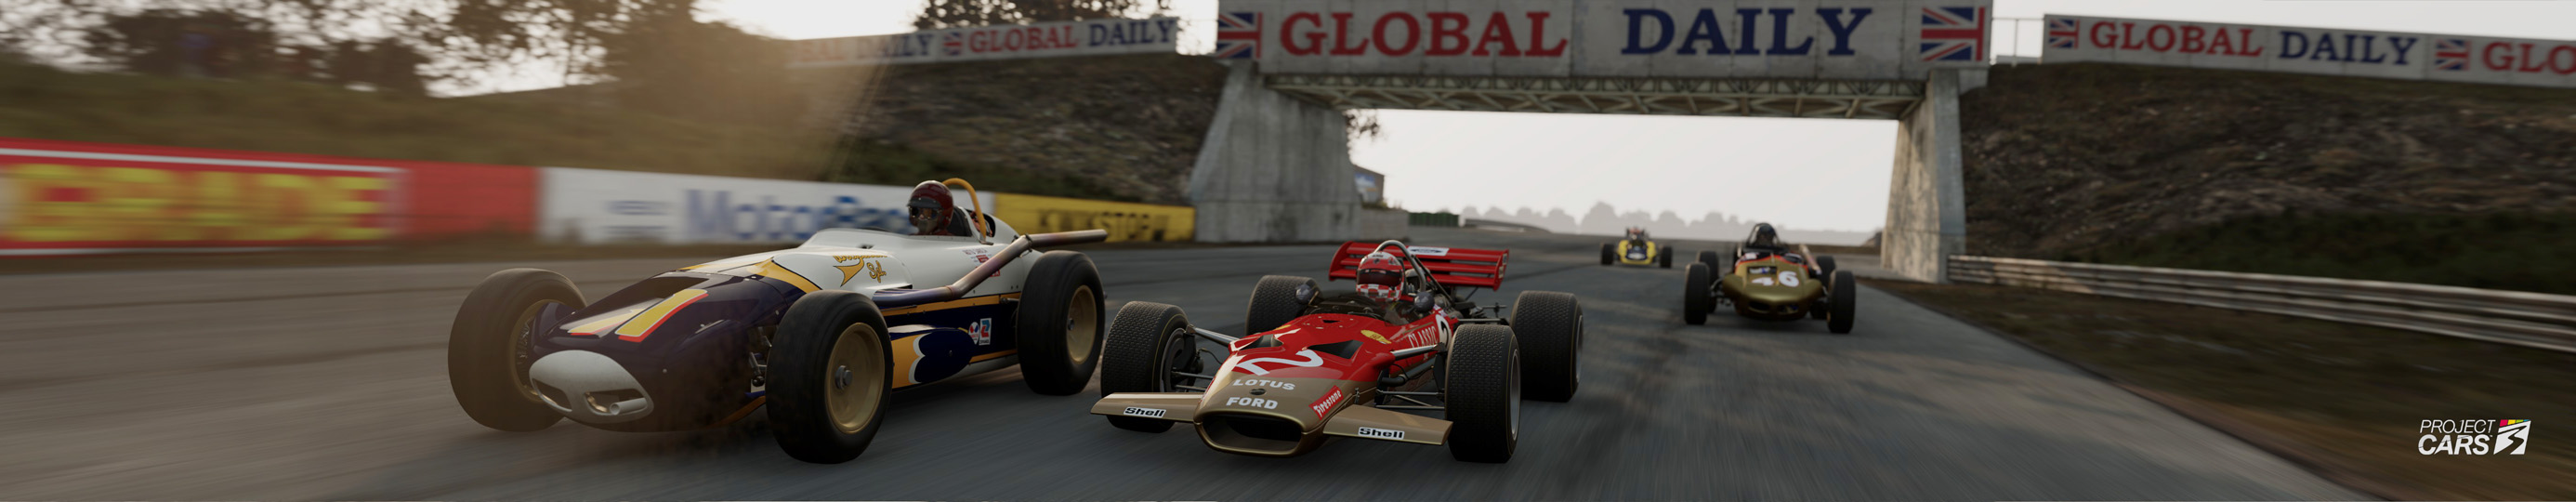 3 PROJECT CARS 3 LOTUS 49C at SILVERSTONE CLASSIC GP crop copy.jpg